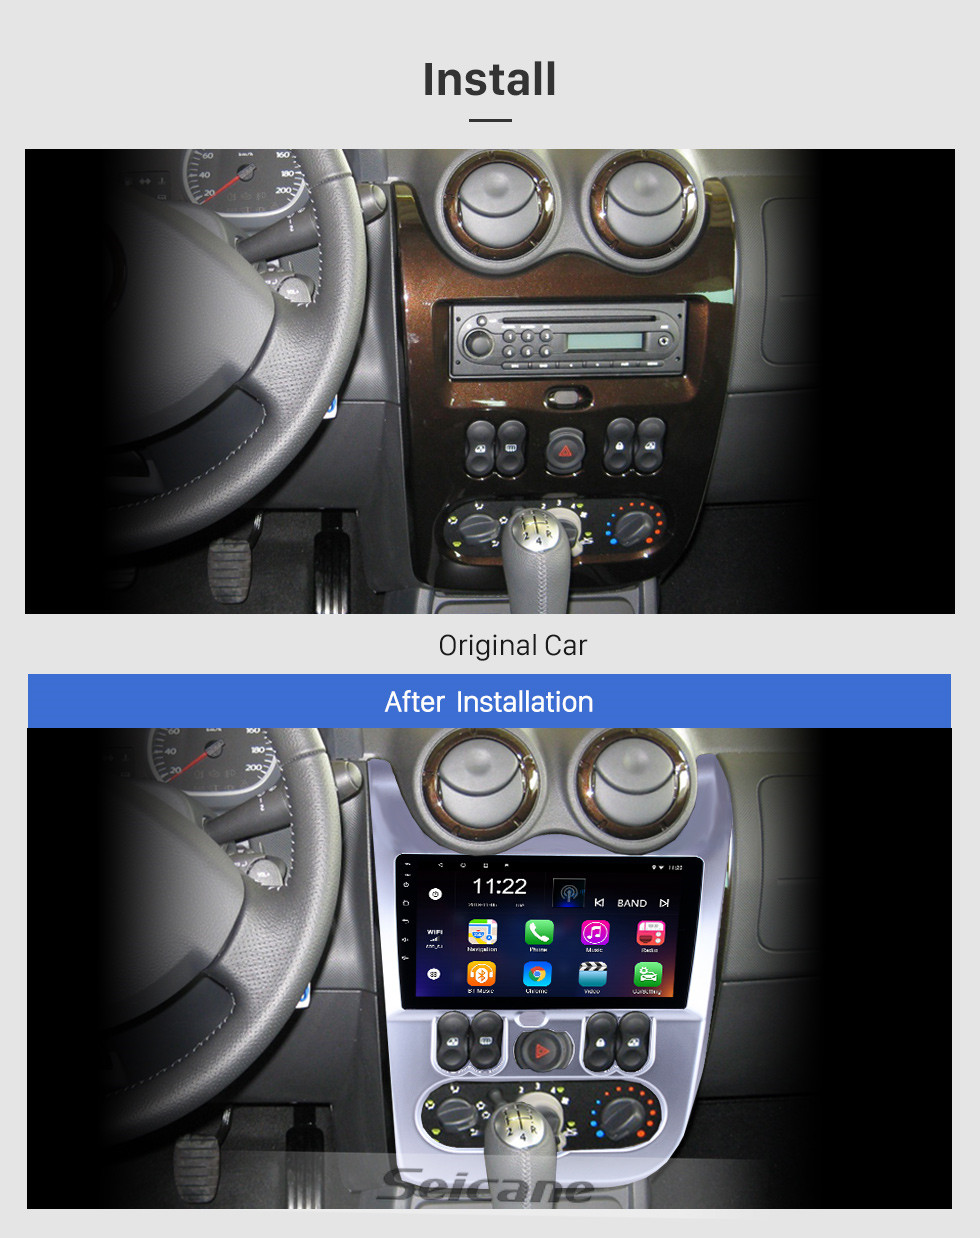 https://www.seicane.com/media/wysiwyg/80/816049/span-2009-2010-2011-2012-2013-renault-duster-logan-gps-navigation-car-stereo-with-android-hd-touch-screen-span-H6249N_02.jpg